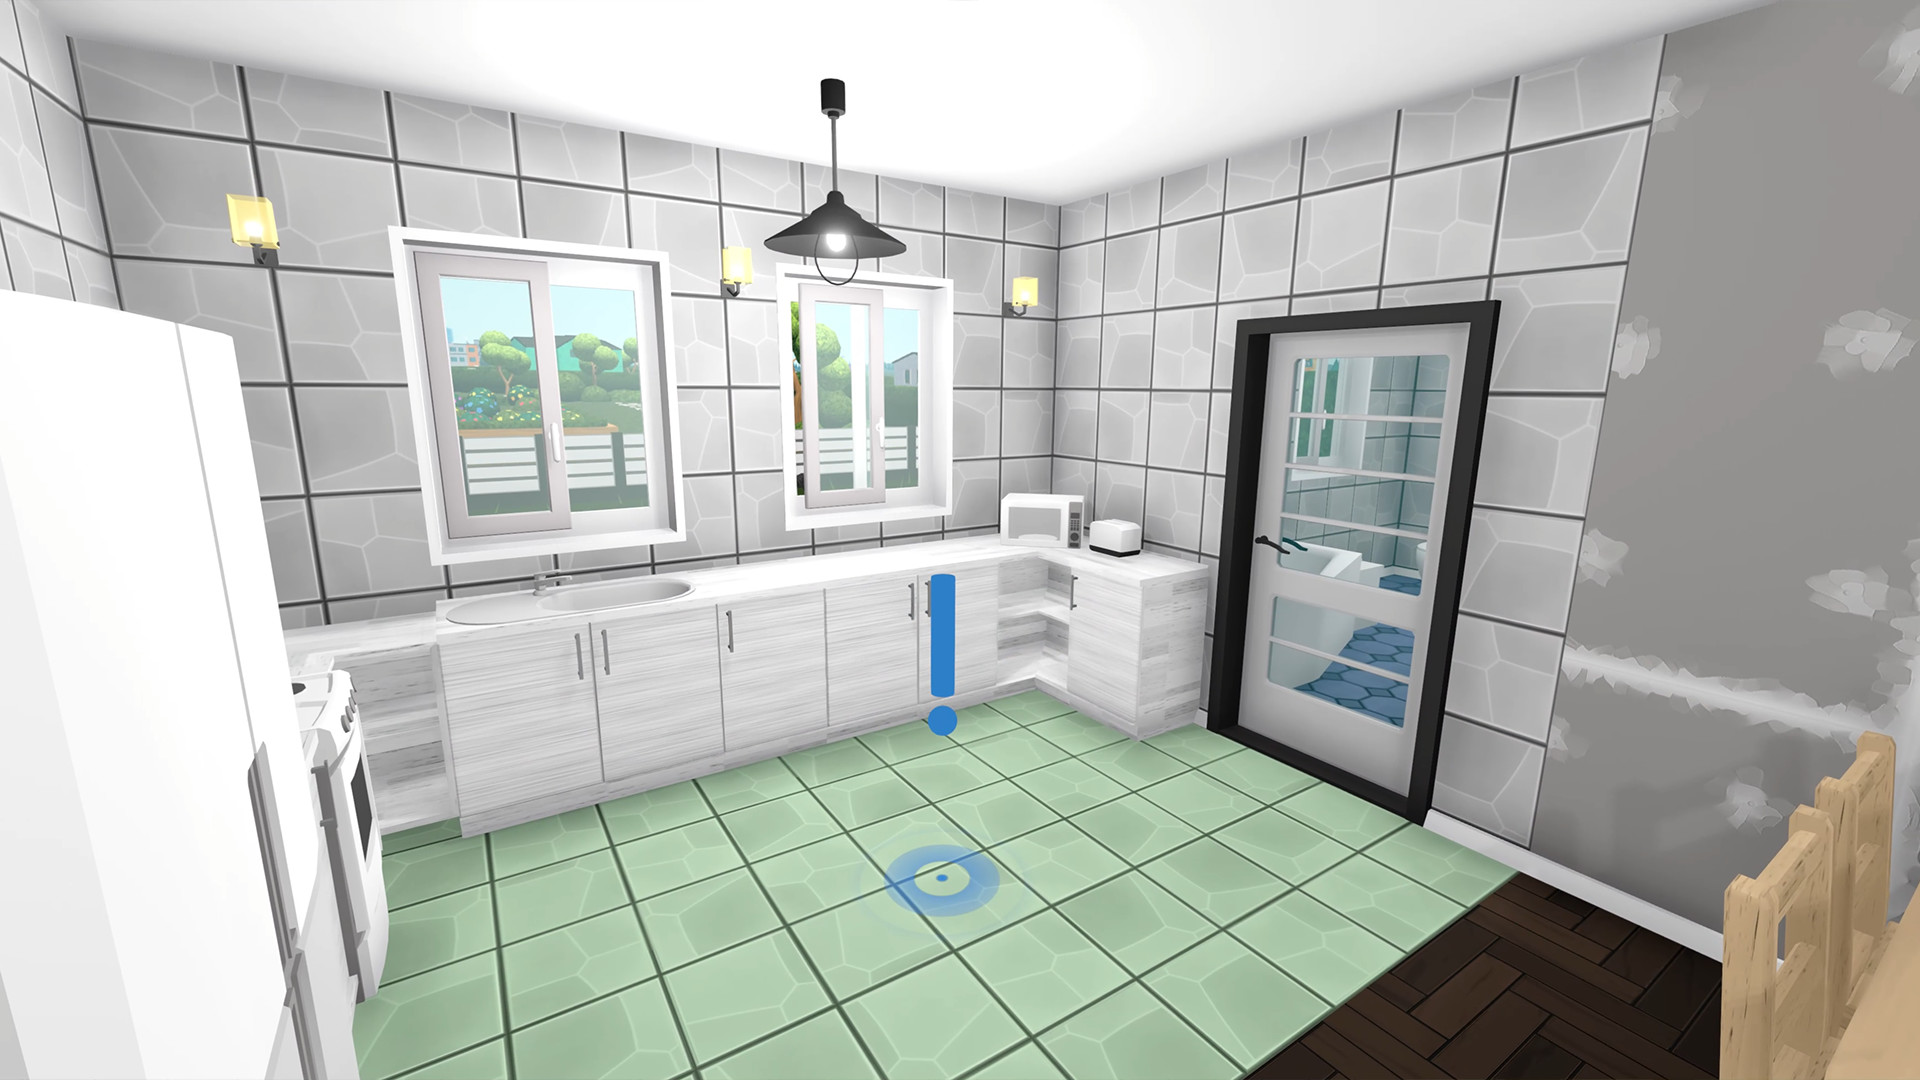 House Flipper VR Free Download